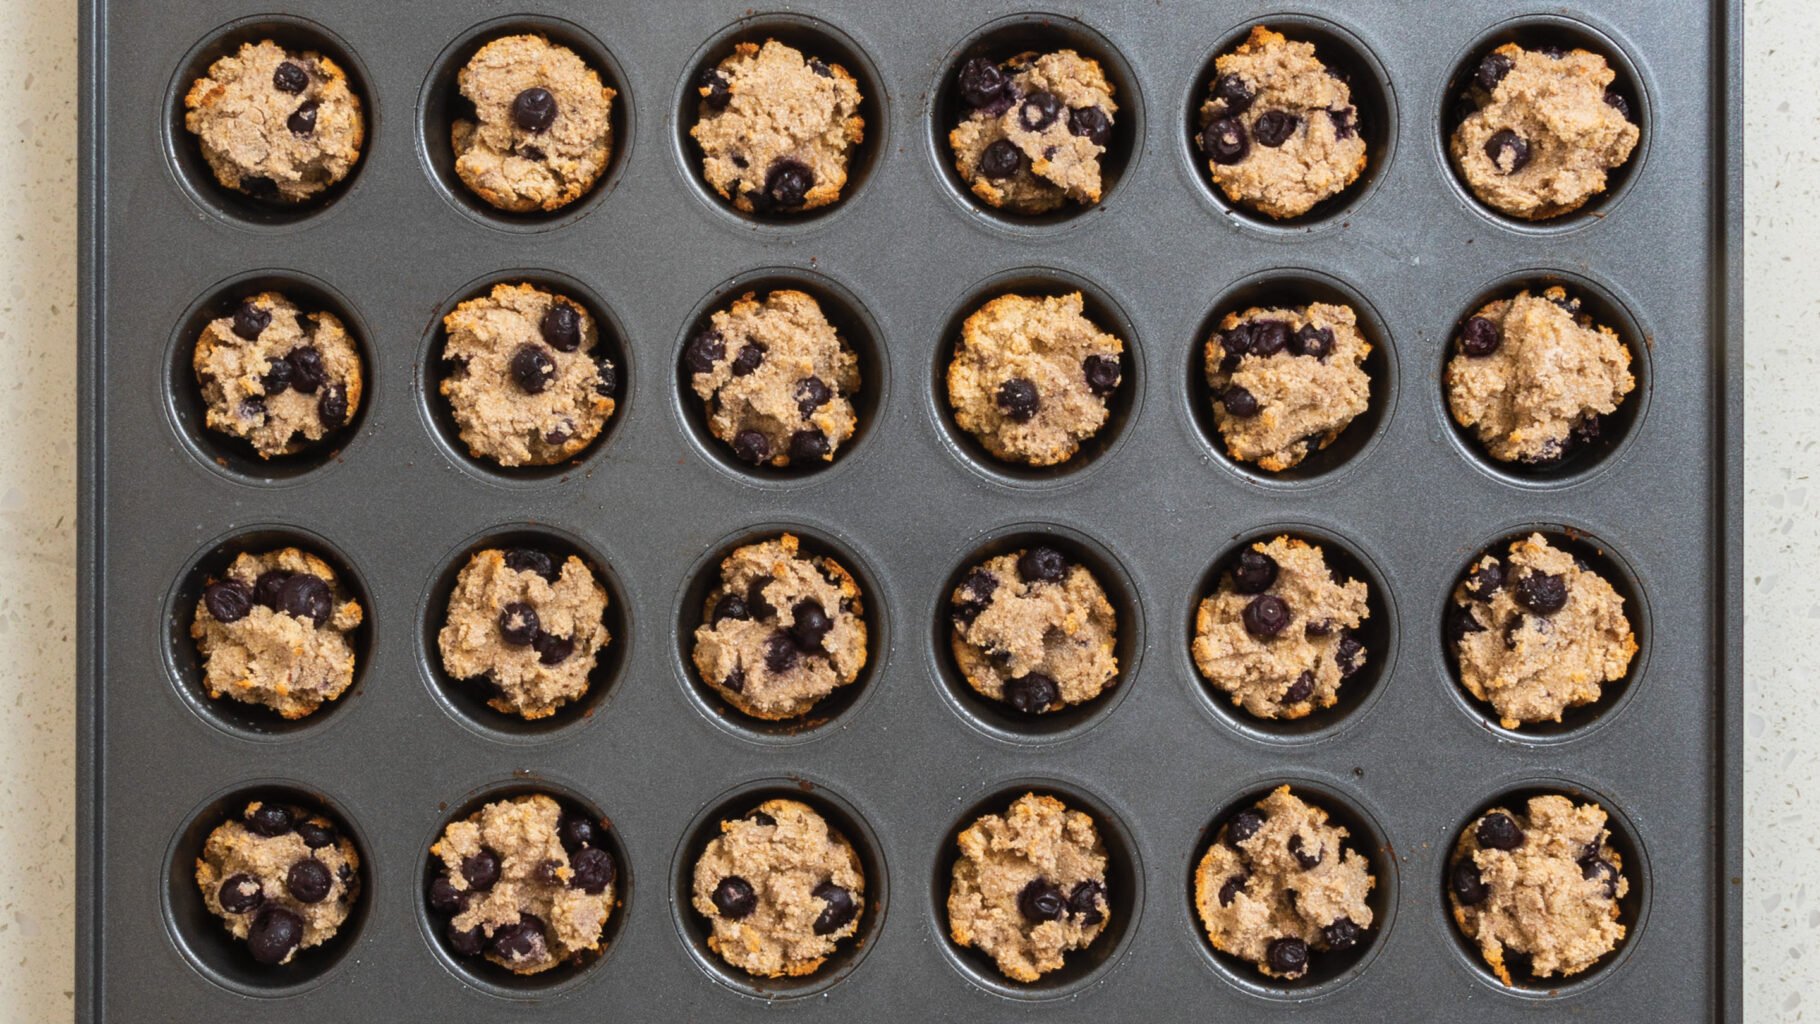 Lemon Blueberry Muffins Recipe excerpted from First Bites: A Science-Based Guide to Nutrition for Baby’s First 1,000 Days by Evelyn Rusli and Arianna Schioldager.